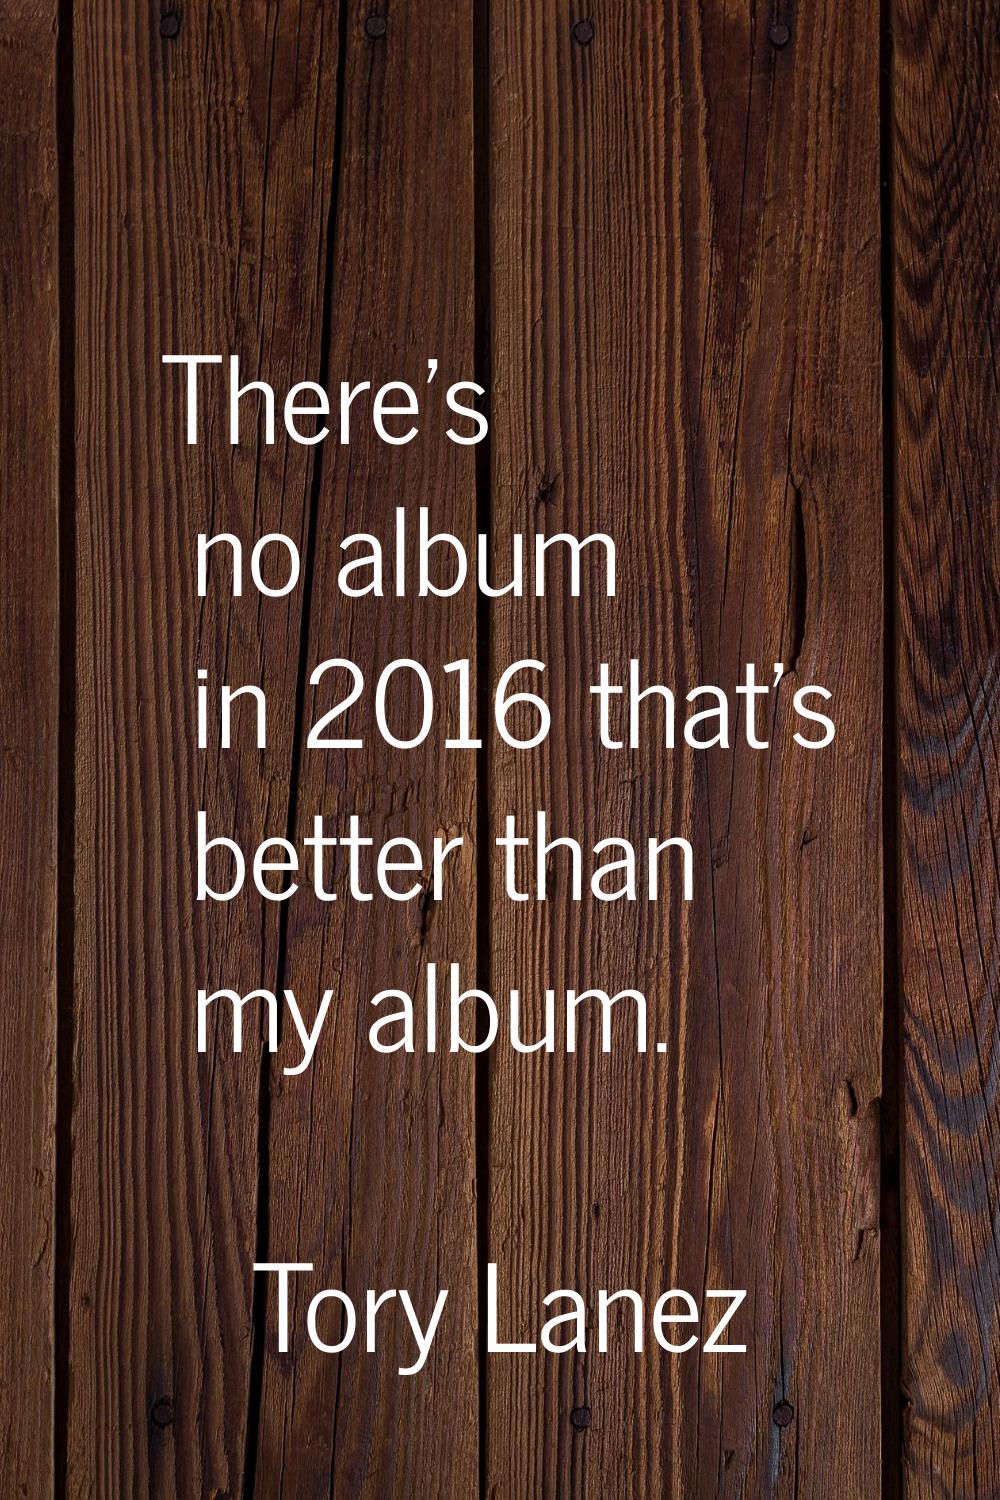 There's no album in 2016 that's better than my album.